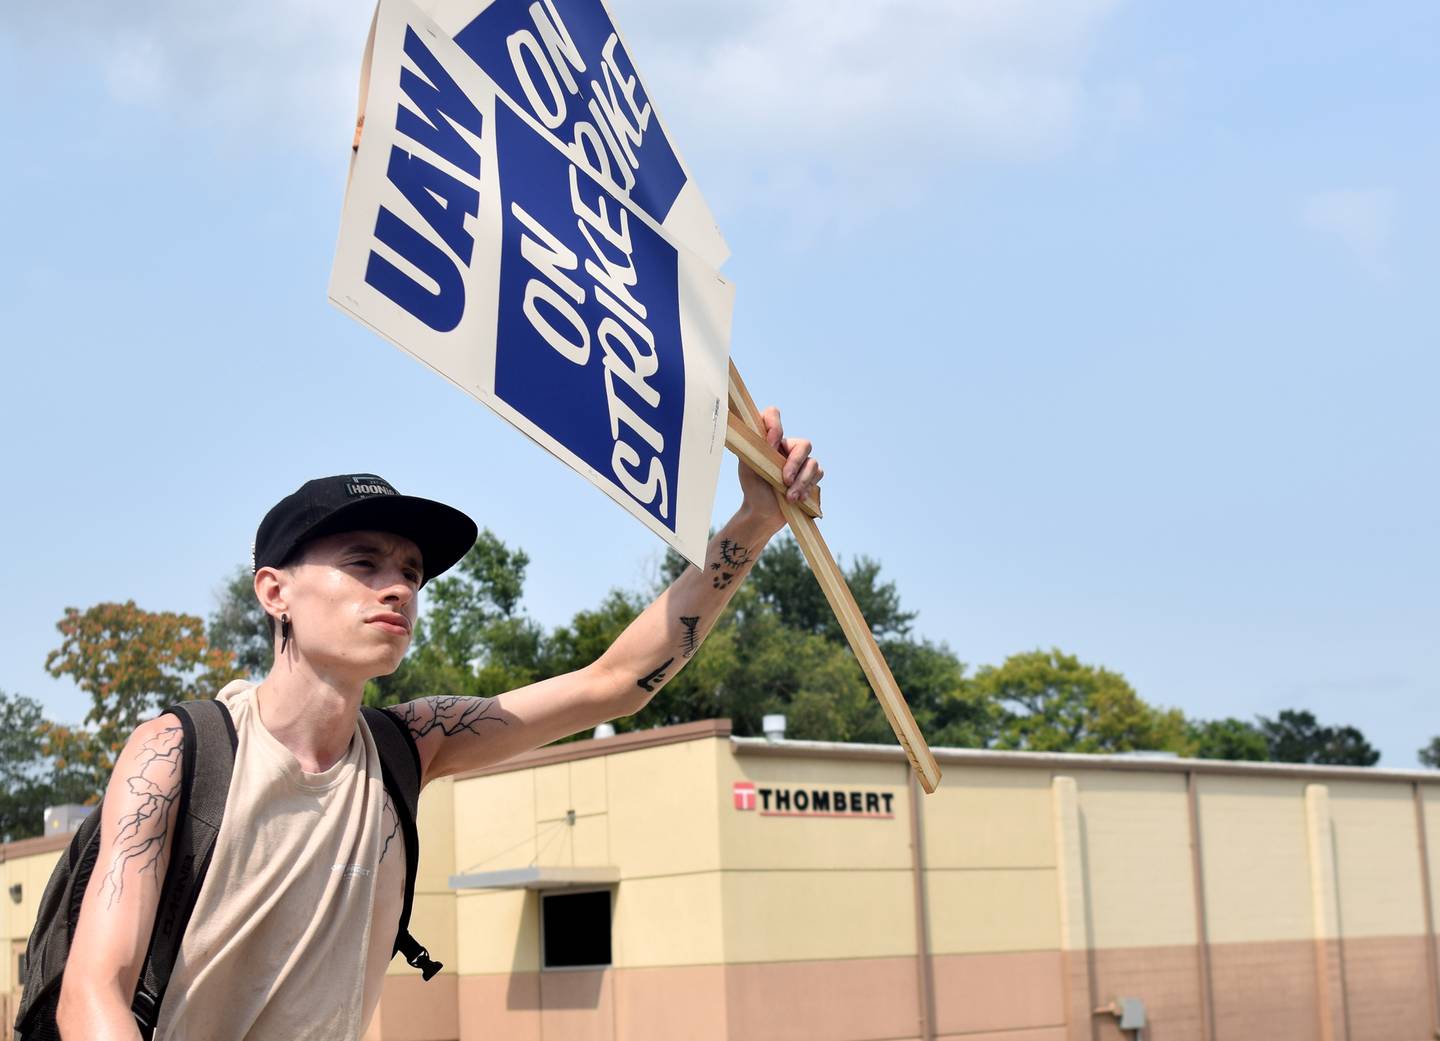 Thombert Inc. employees and members of the United Auto Workers Local 997 union went on strike Tuesday, Aug. 1 outside the Newton facility.